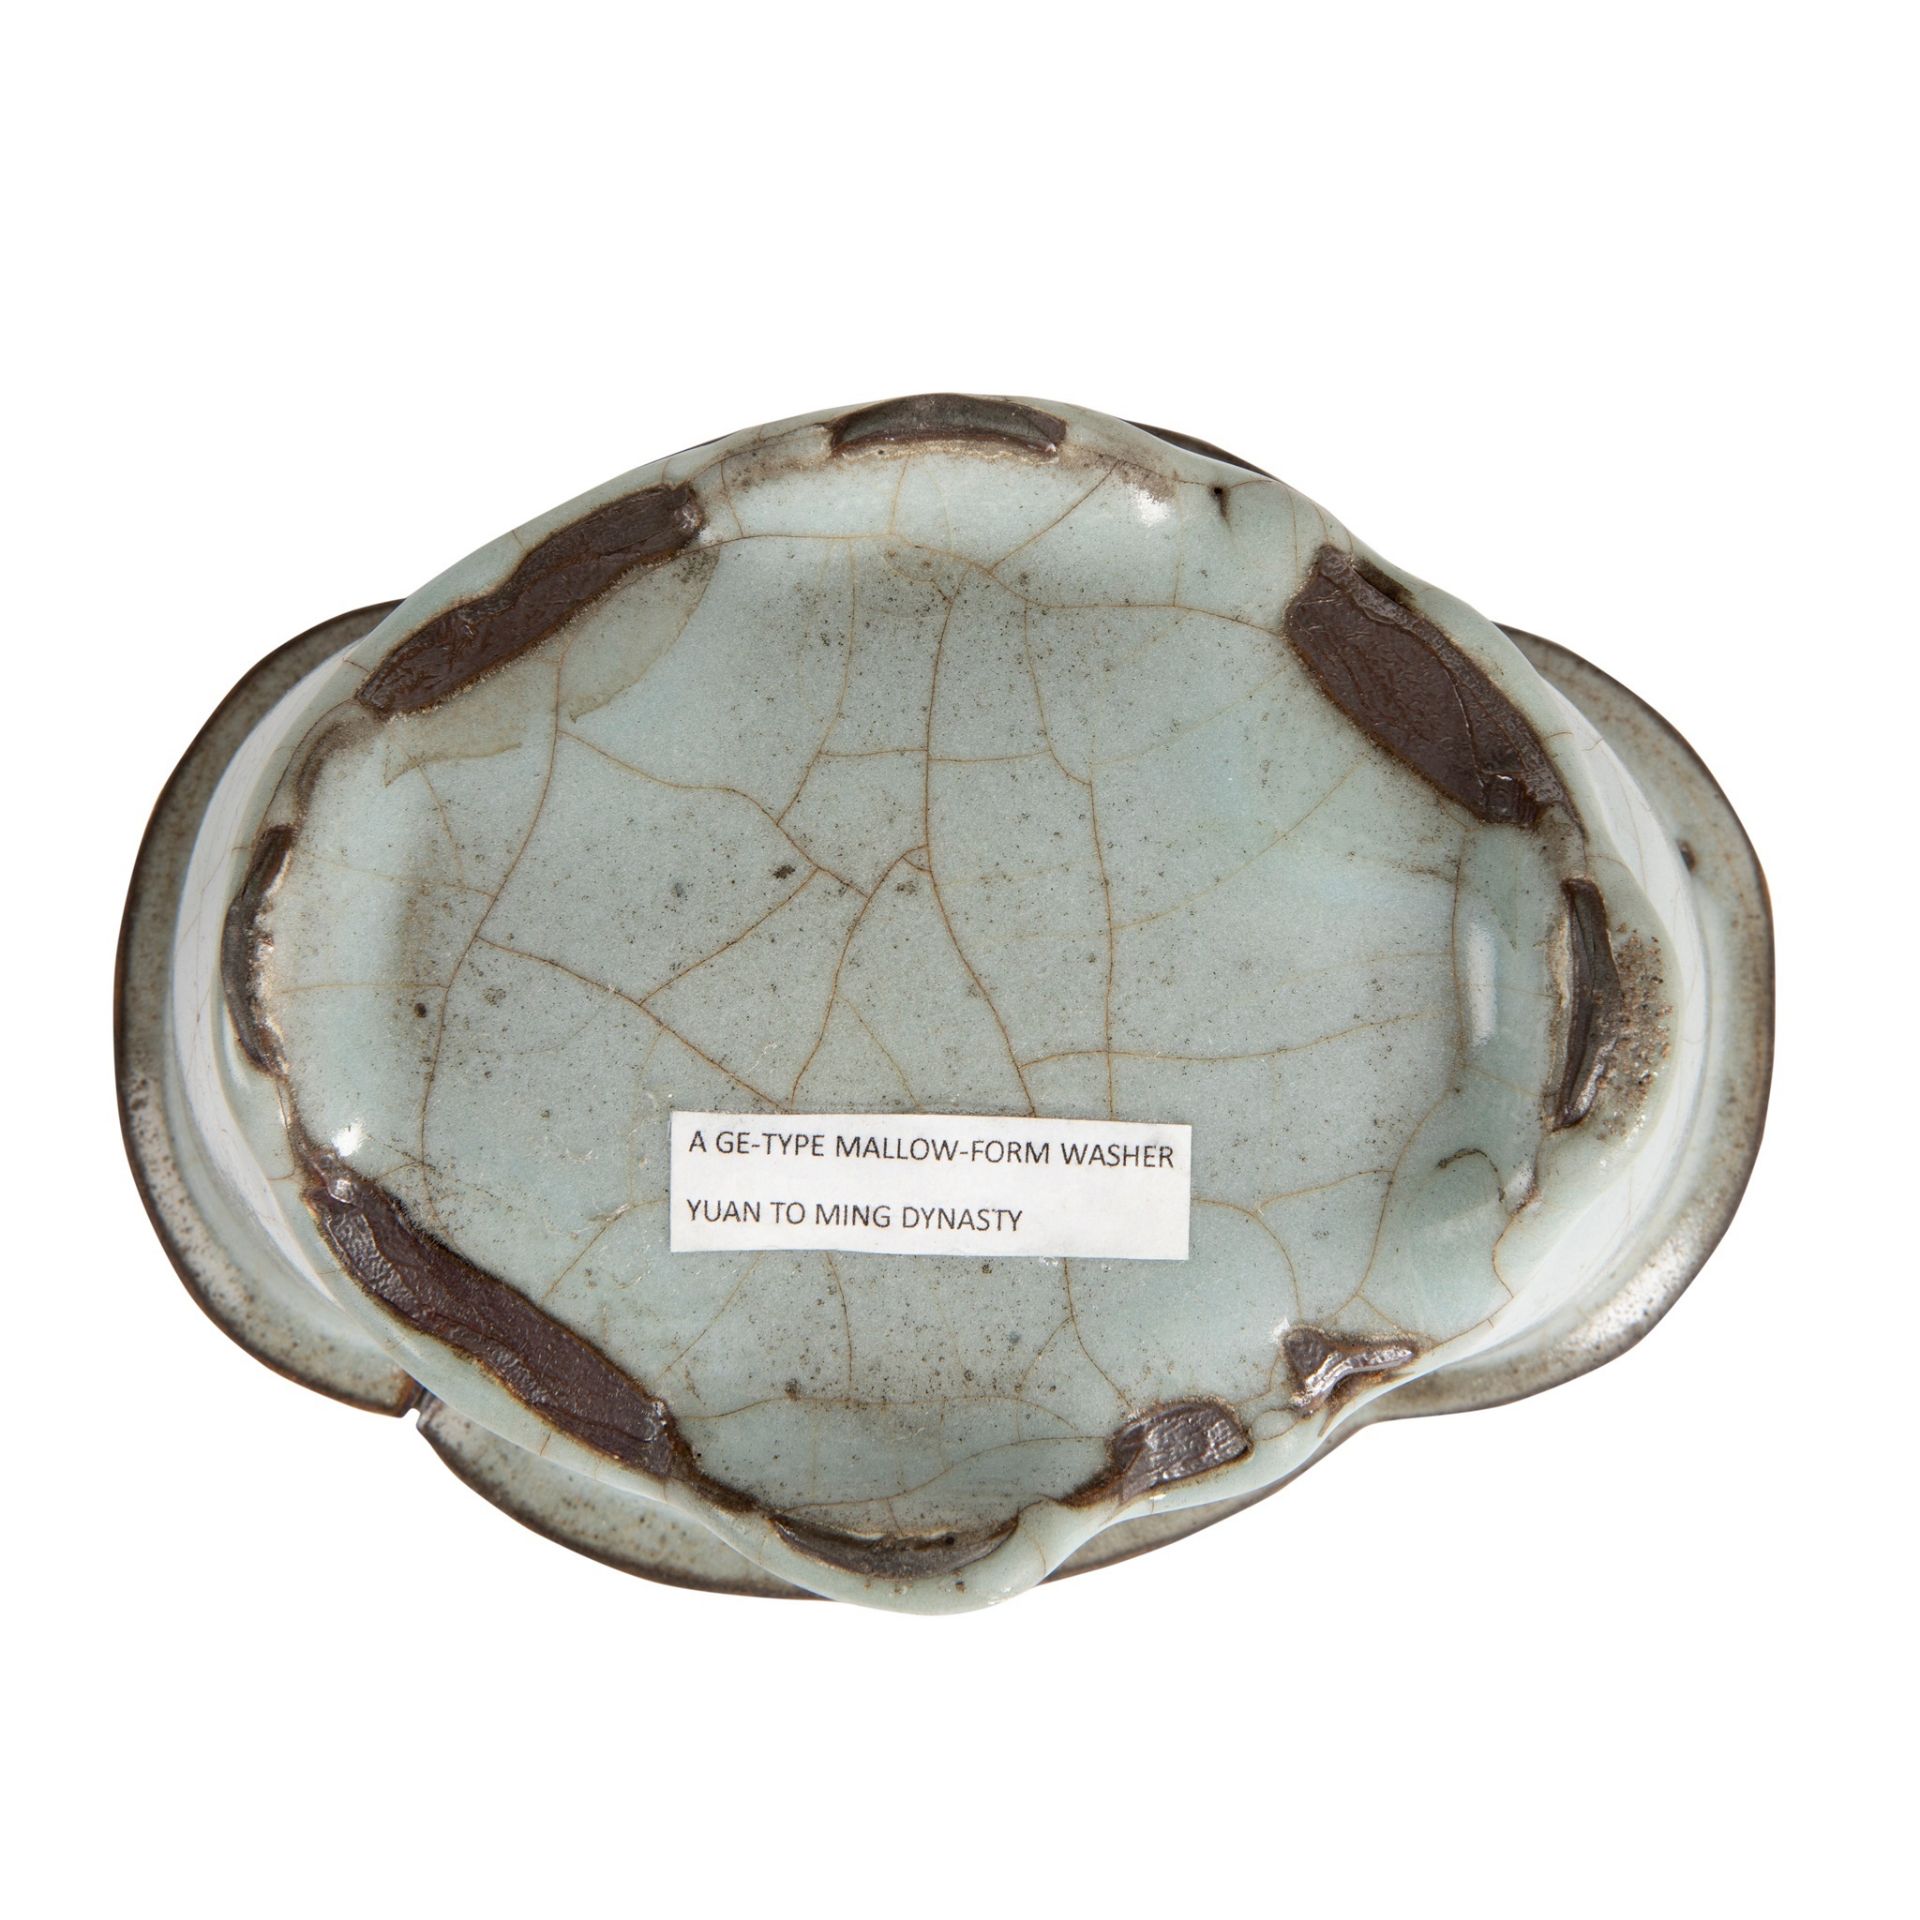 GE-TYPE CRACKLE-GLAZED LOBED WASHER POSSIBLY YUAN TO MING DYNASTY - Image 2 of 2